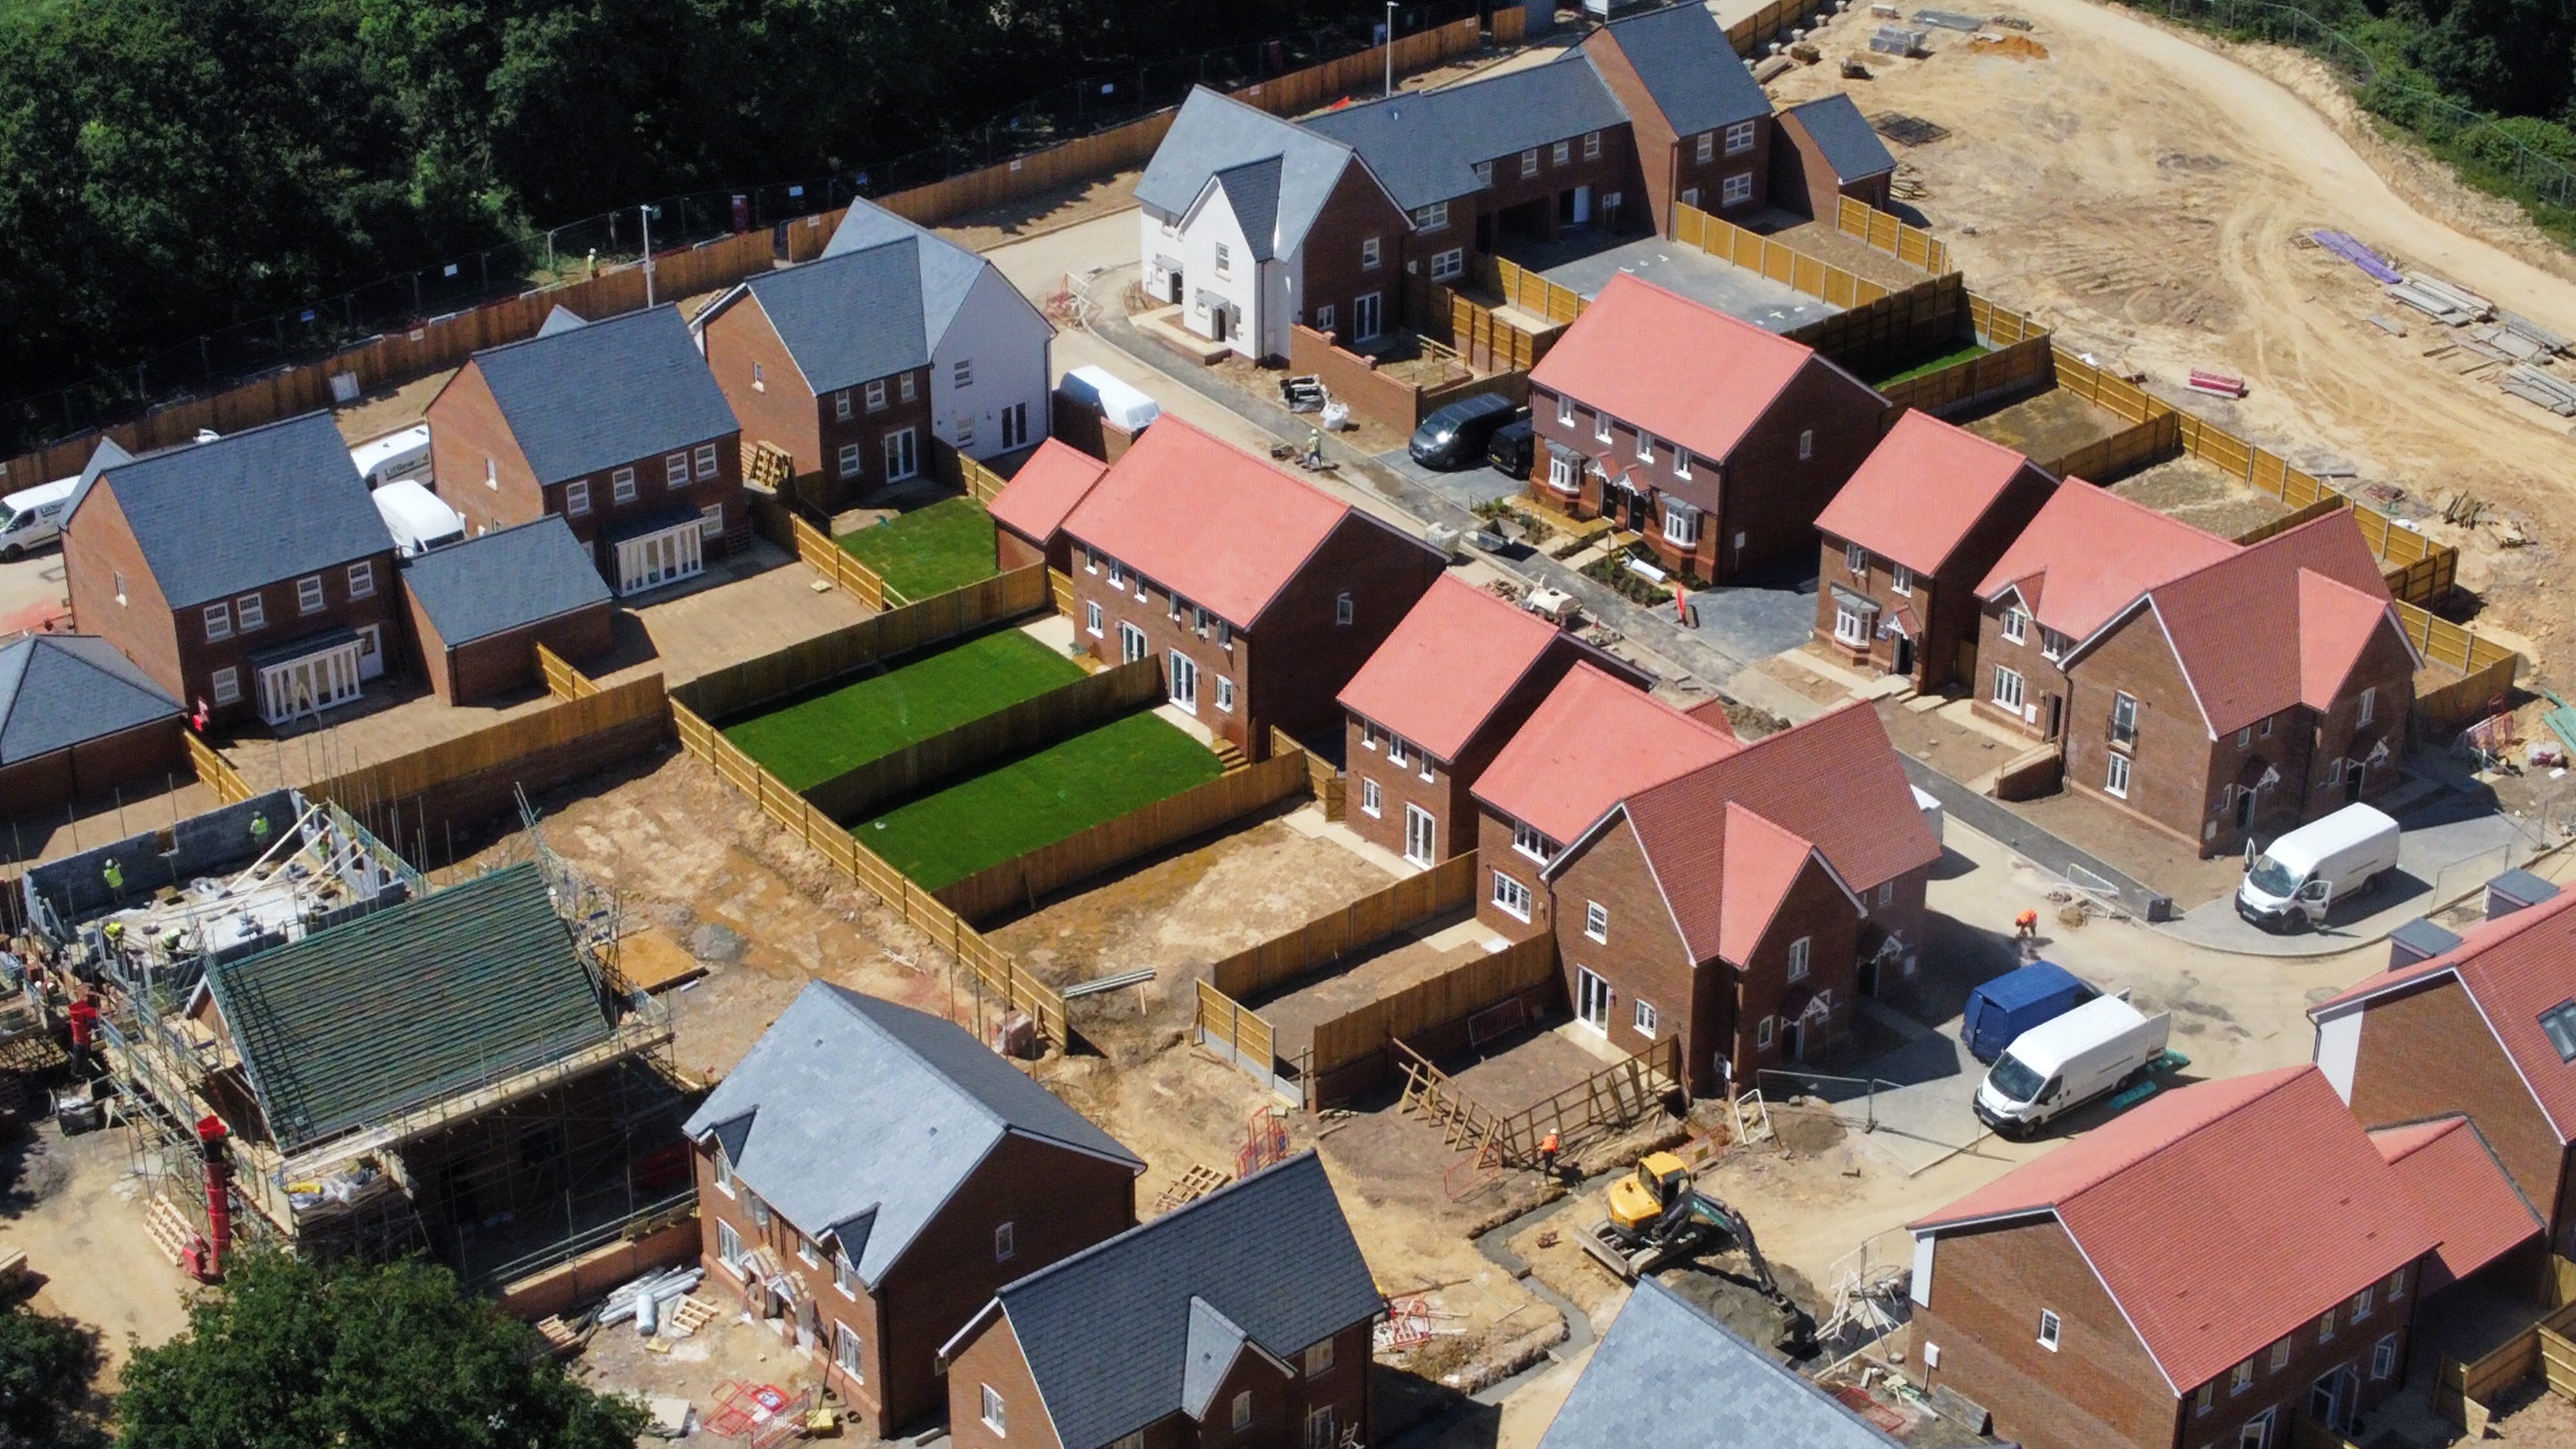 New Build Housing Construction. Residential Estate from the air. New Houses being developed on construction site in the UK; Shutterstock ID 1990686923; purchase_order: N/A; job: PJ January 2023 Andy Jones; client: ; other: 